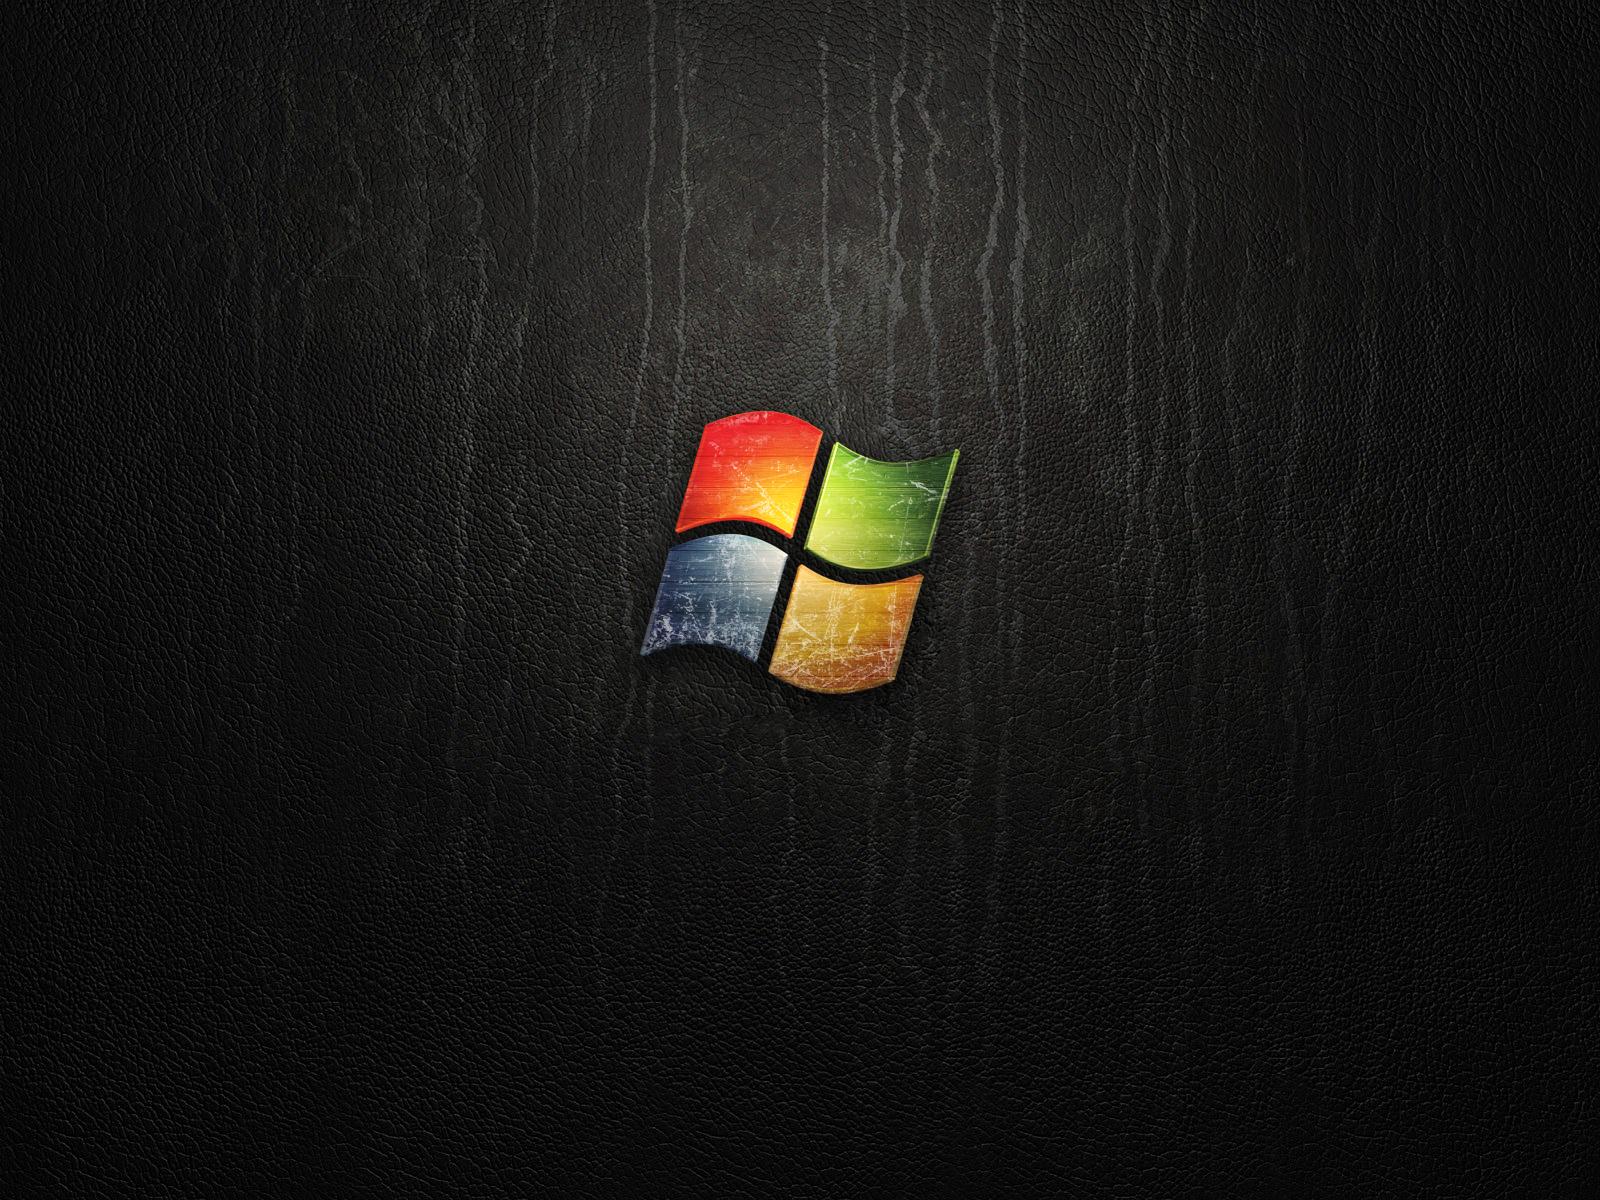 Download 1600x1200 Weathered Windows Wallpapers desktop PC and Mac